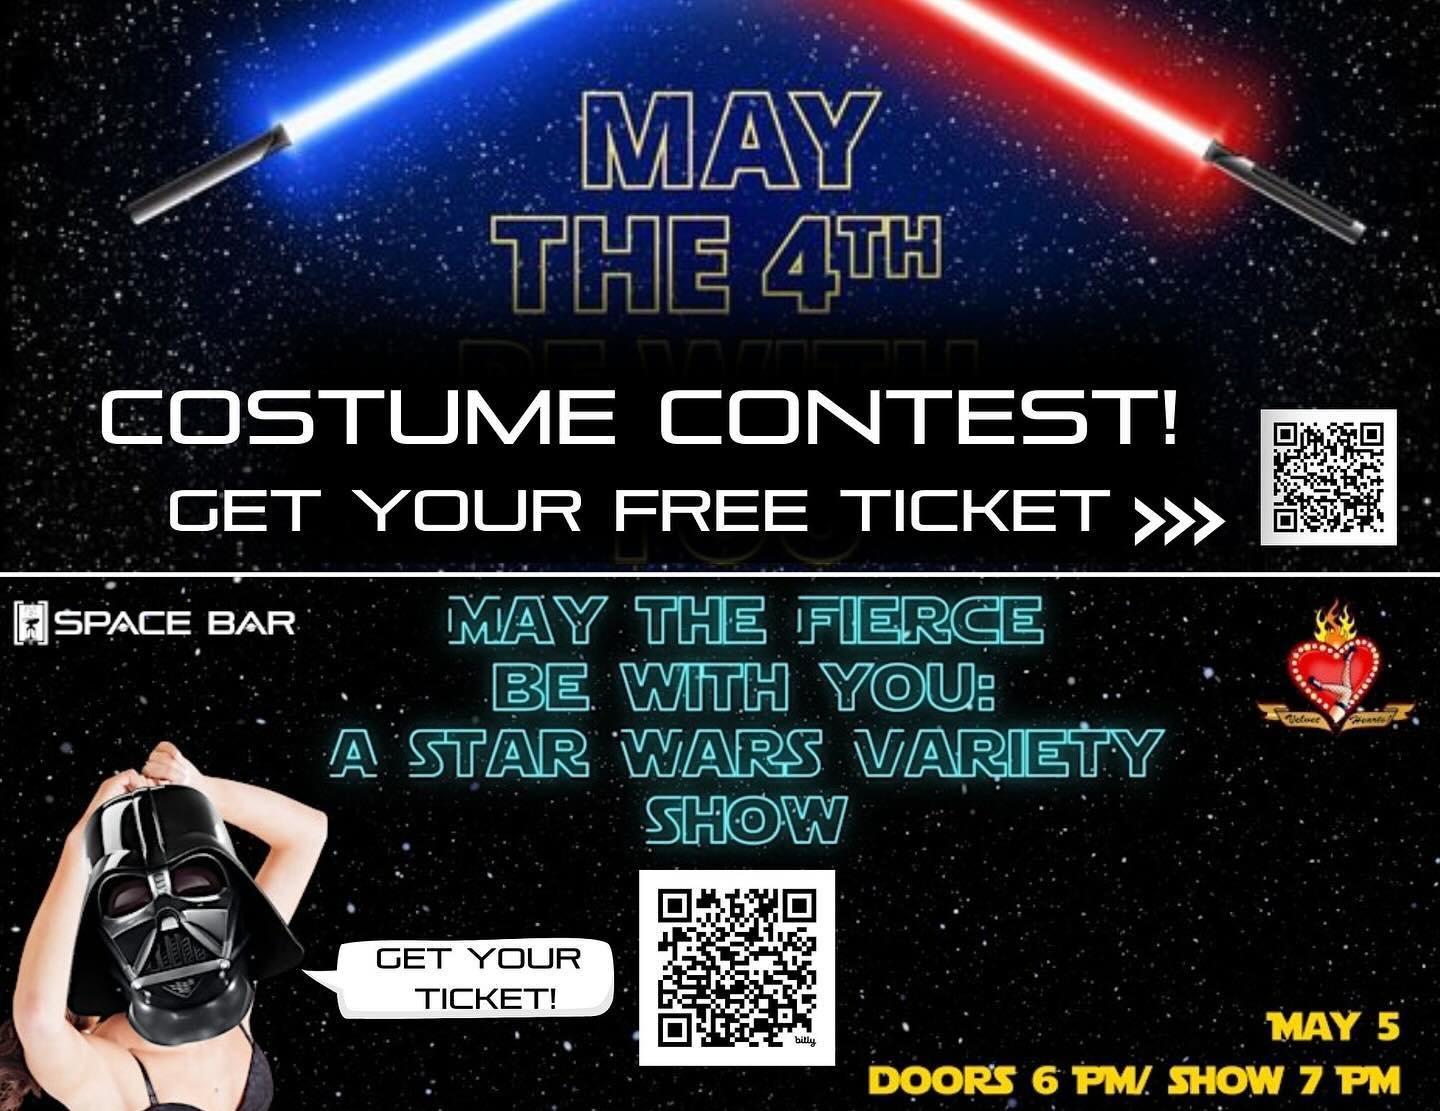 The best place to spend May the Fourth Be with is SPACE BAR!!!
🚀🍹🌟
Wear your best SPACE GEAR and Grab your FREE TICKET to gain entrance on May 4th! Win prizes in our COSTUME CONTEST! 
🛸👽 🪐
Grab your ticket for Sunday May 5 for a Star Wars Theme